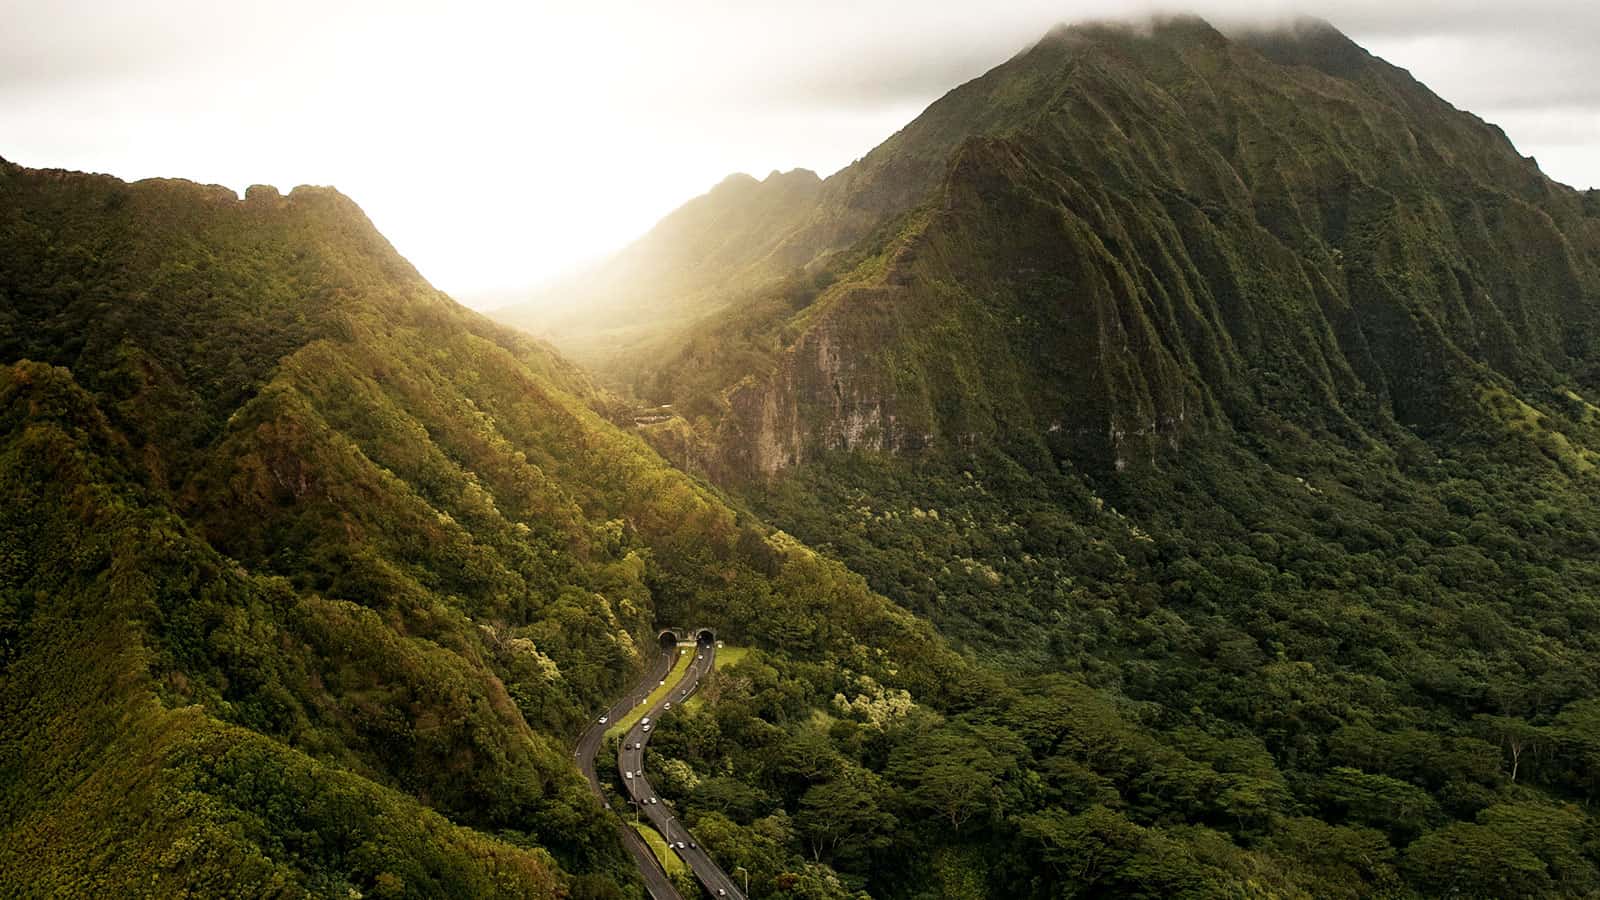 Oahu Hawaii mountain range and highway with electric cars